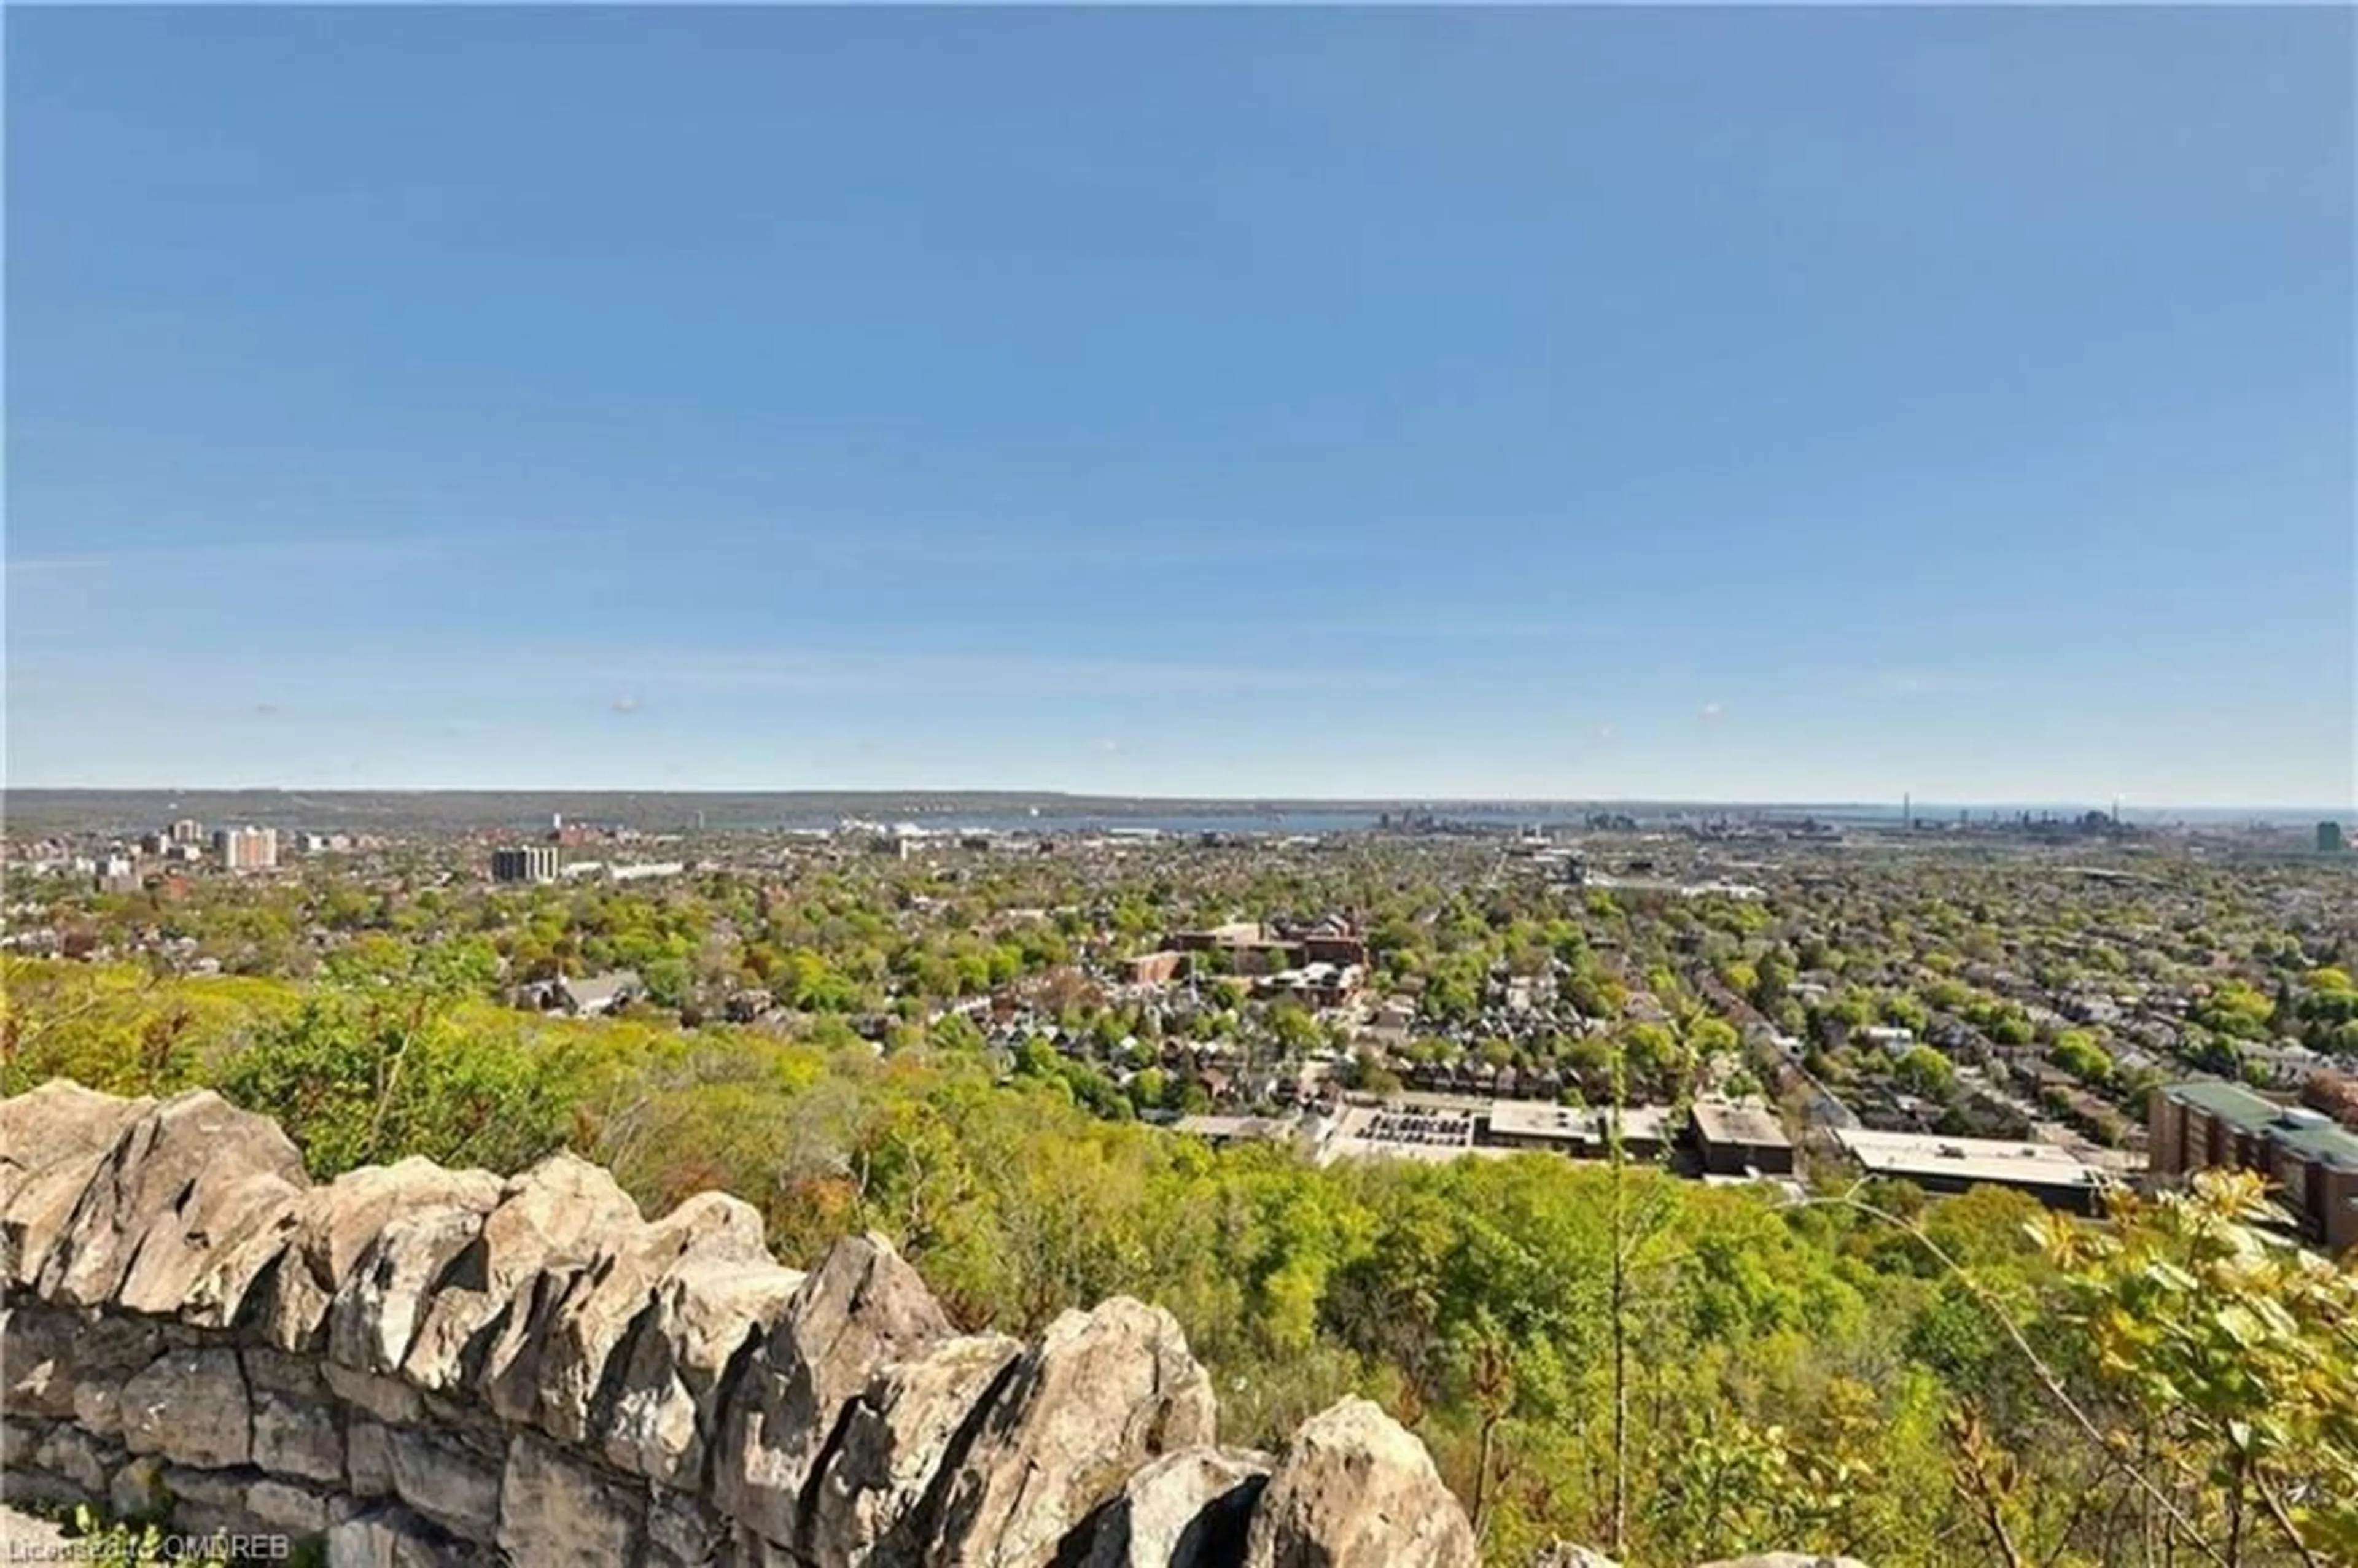 Lakeview for 5 East 36th St #205C, Hamilton Ontario L8V 3Y6